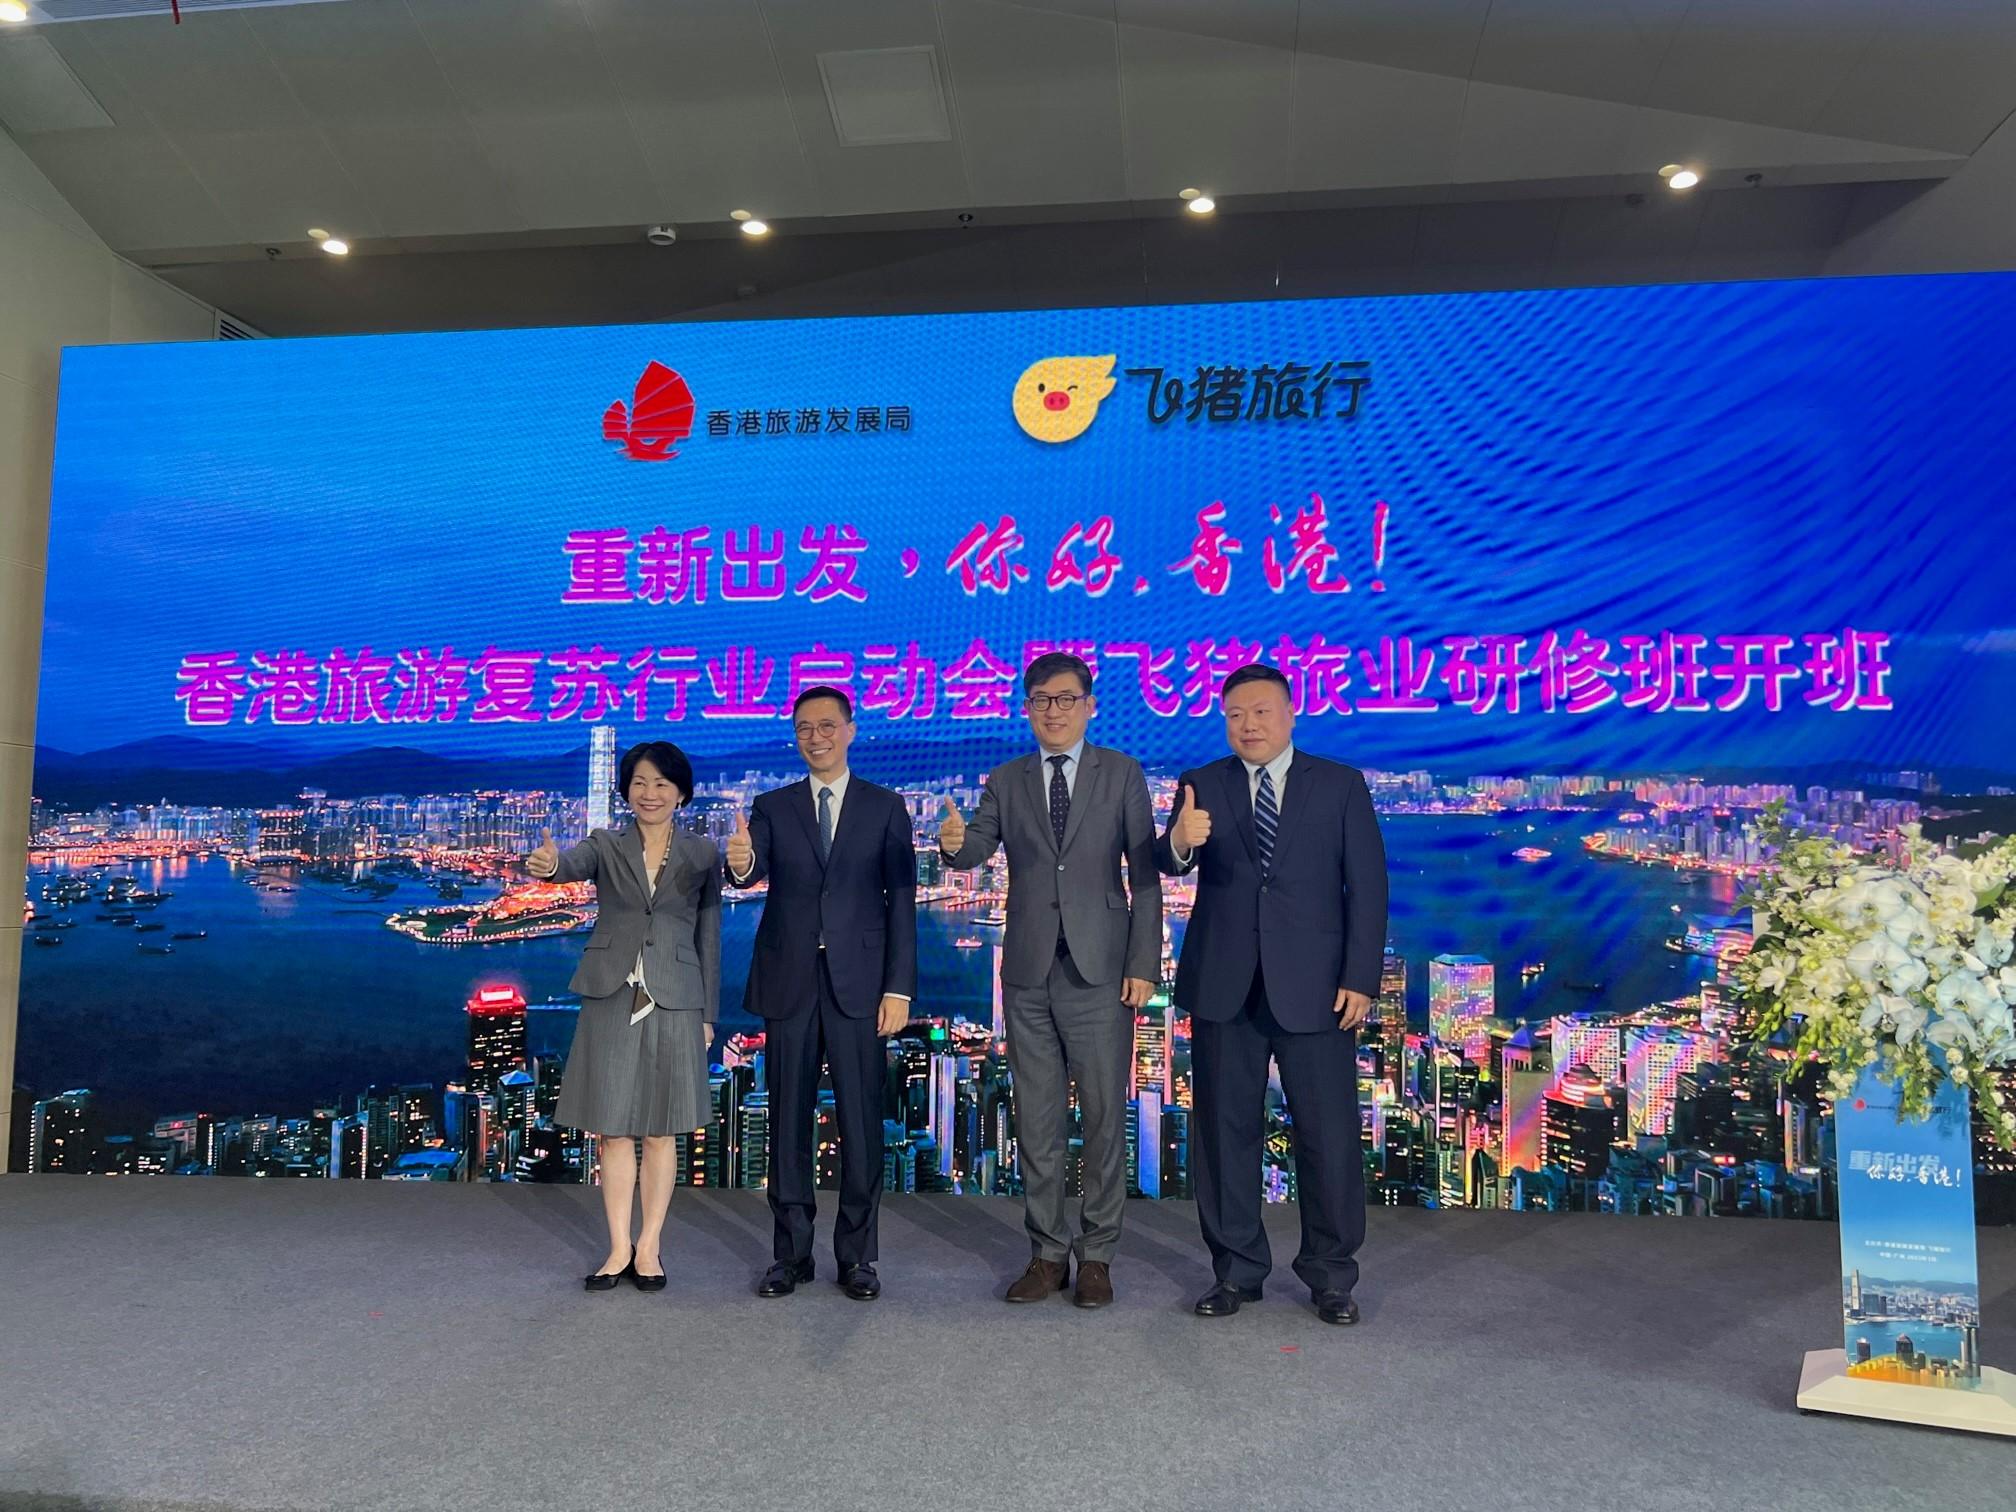 The Secretary for Culture, Sports and Tourism, Mr Kevin Yeung (second left), today (March 20) attended an activity organised by the Hong Kong Tourism Board in Guangzhou. The Commissioner for Tourism, Ms Vivian Sum (first left), also joined the activity.